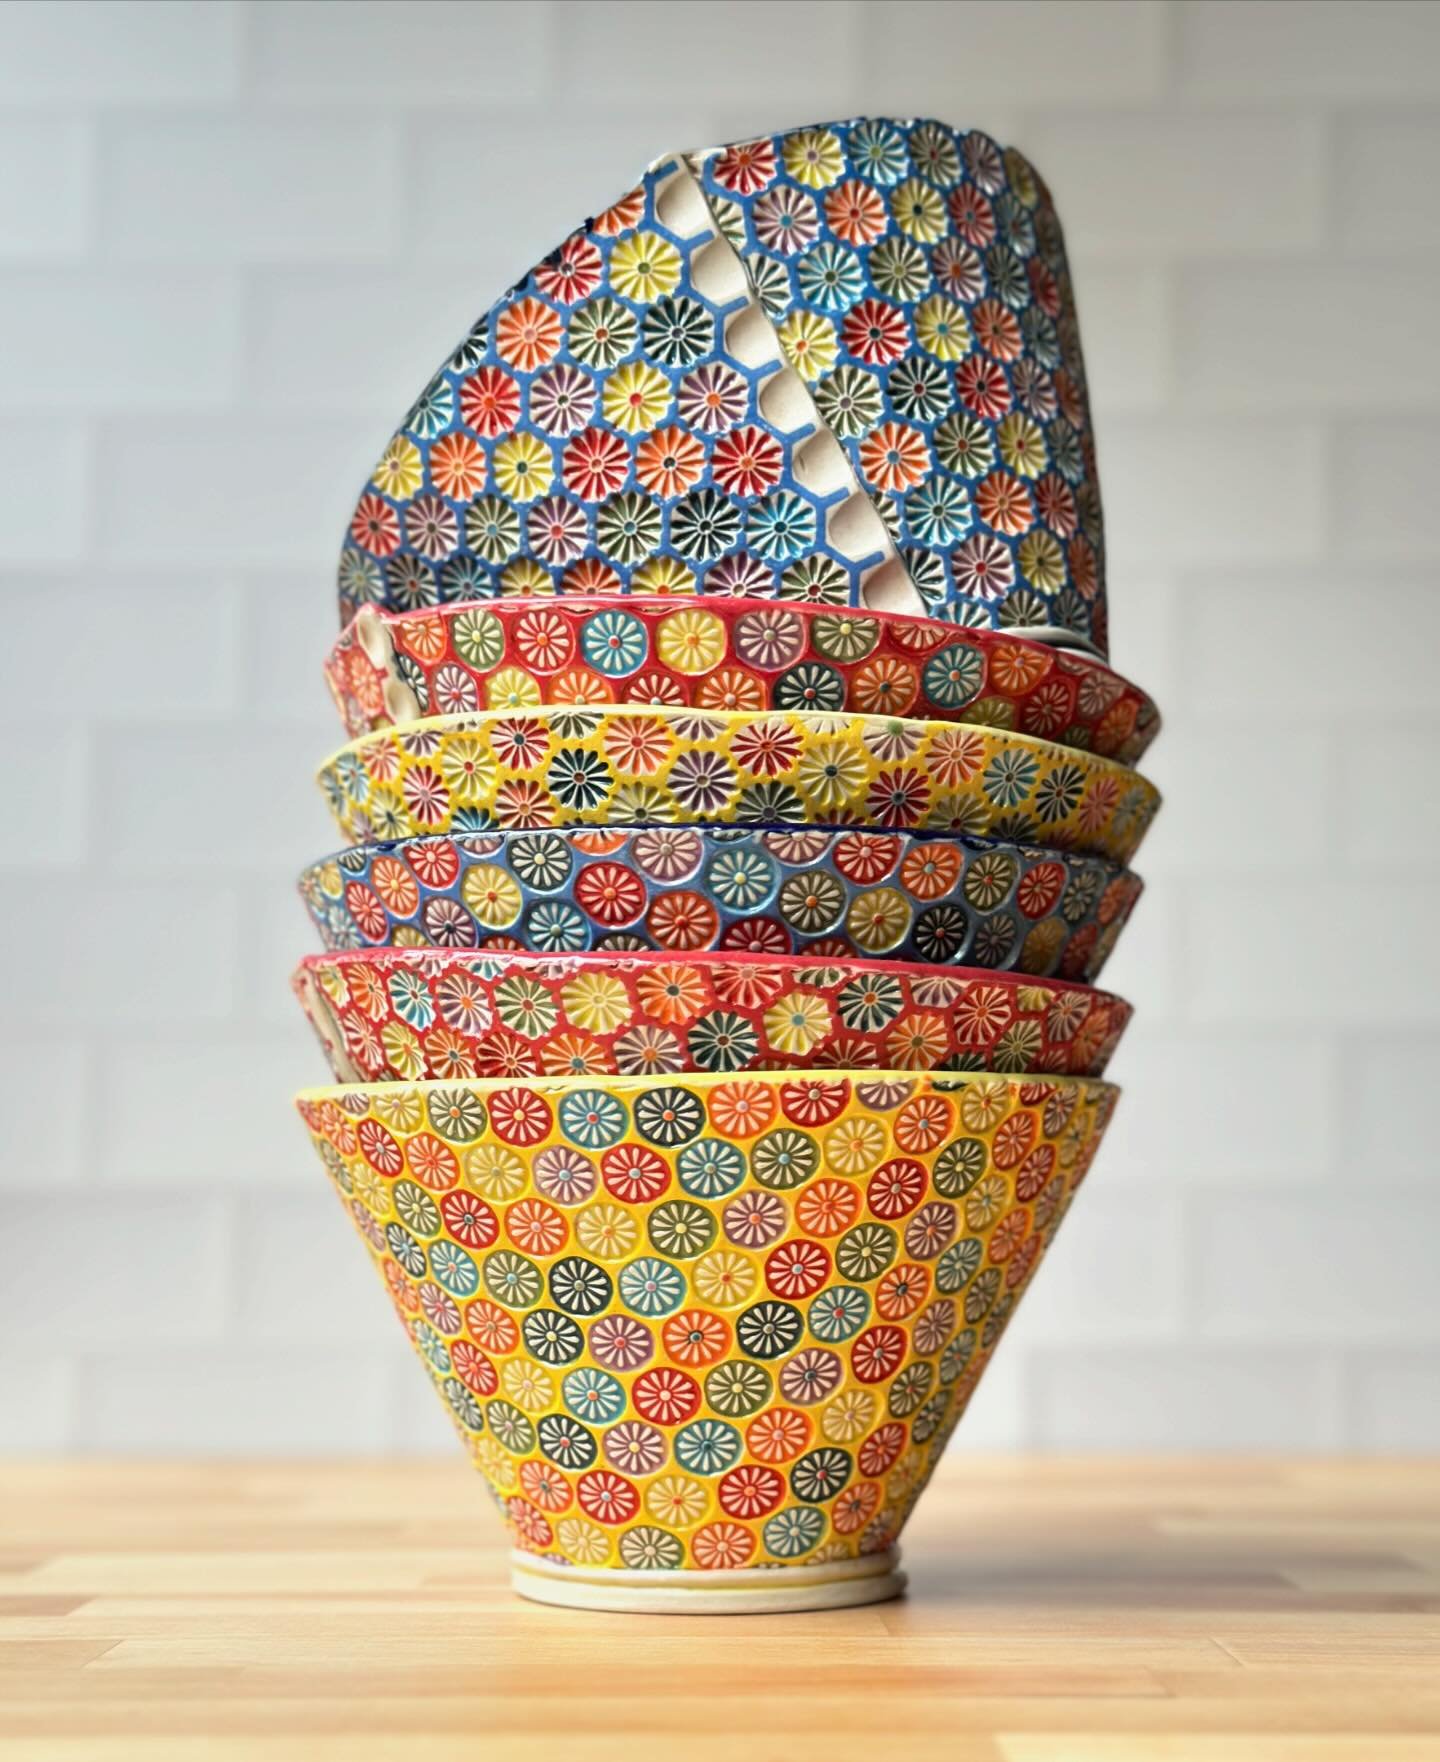 Good morning friends!  Here&rsquo;s a stack of bowls for your viewing pleasure &hellip; 
once again I am amazed that I am so on top of things that I&rsquo;ve been posting twice a day this week. I even cleaned my house yesterday!  I don&rsquo;t know a